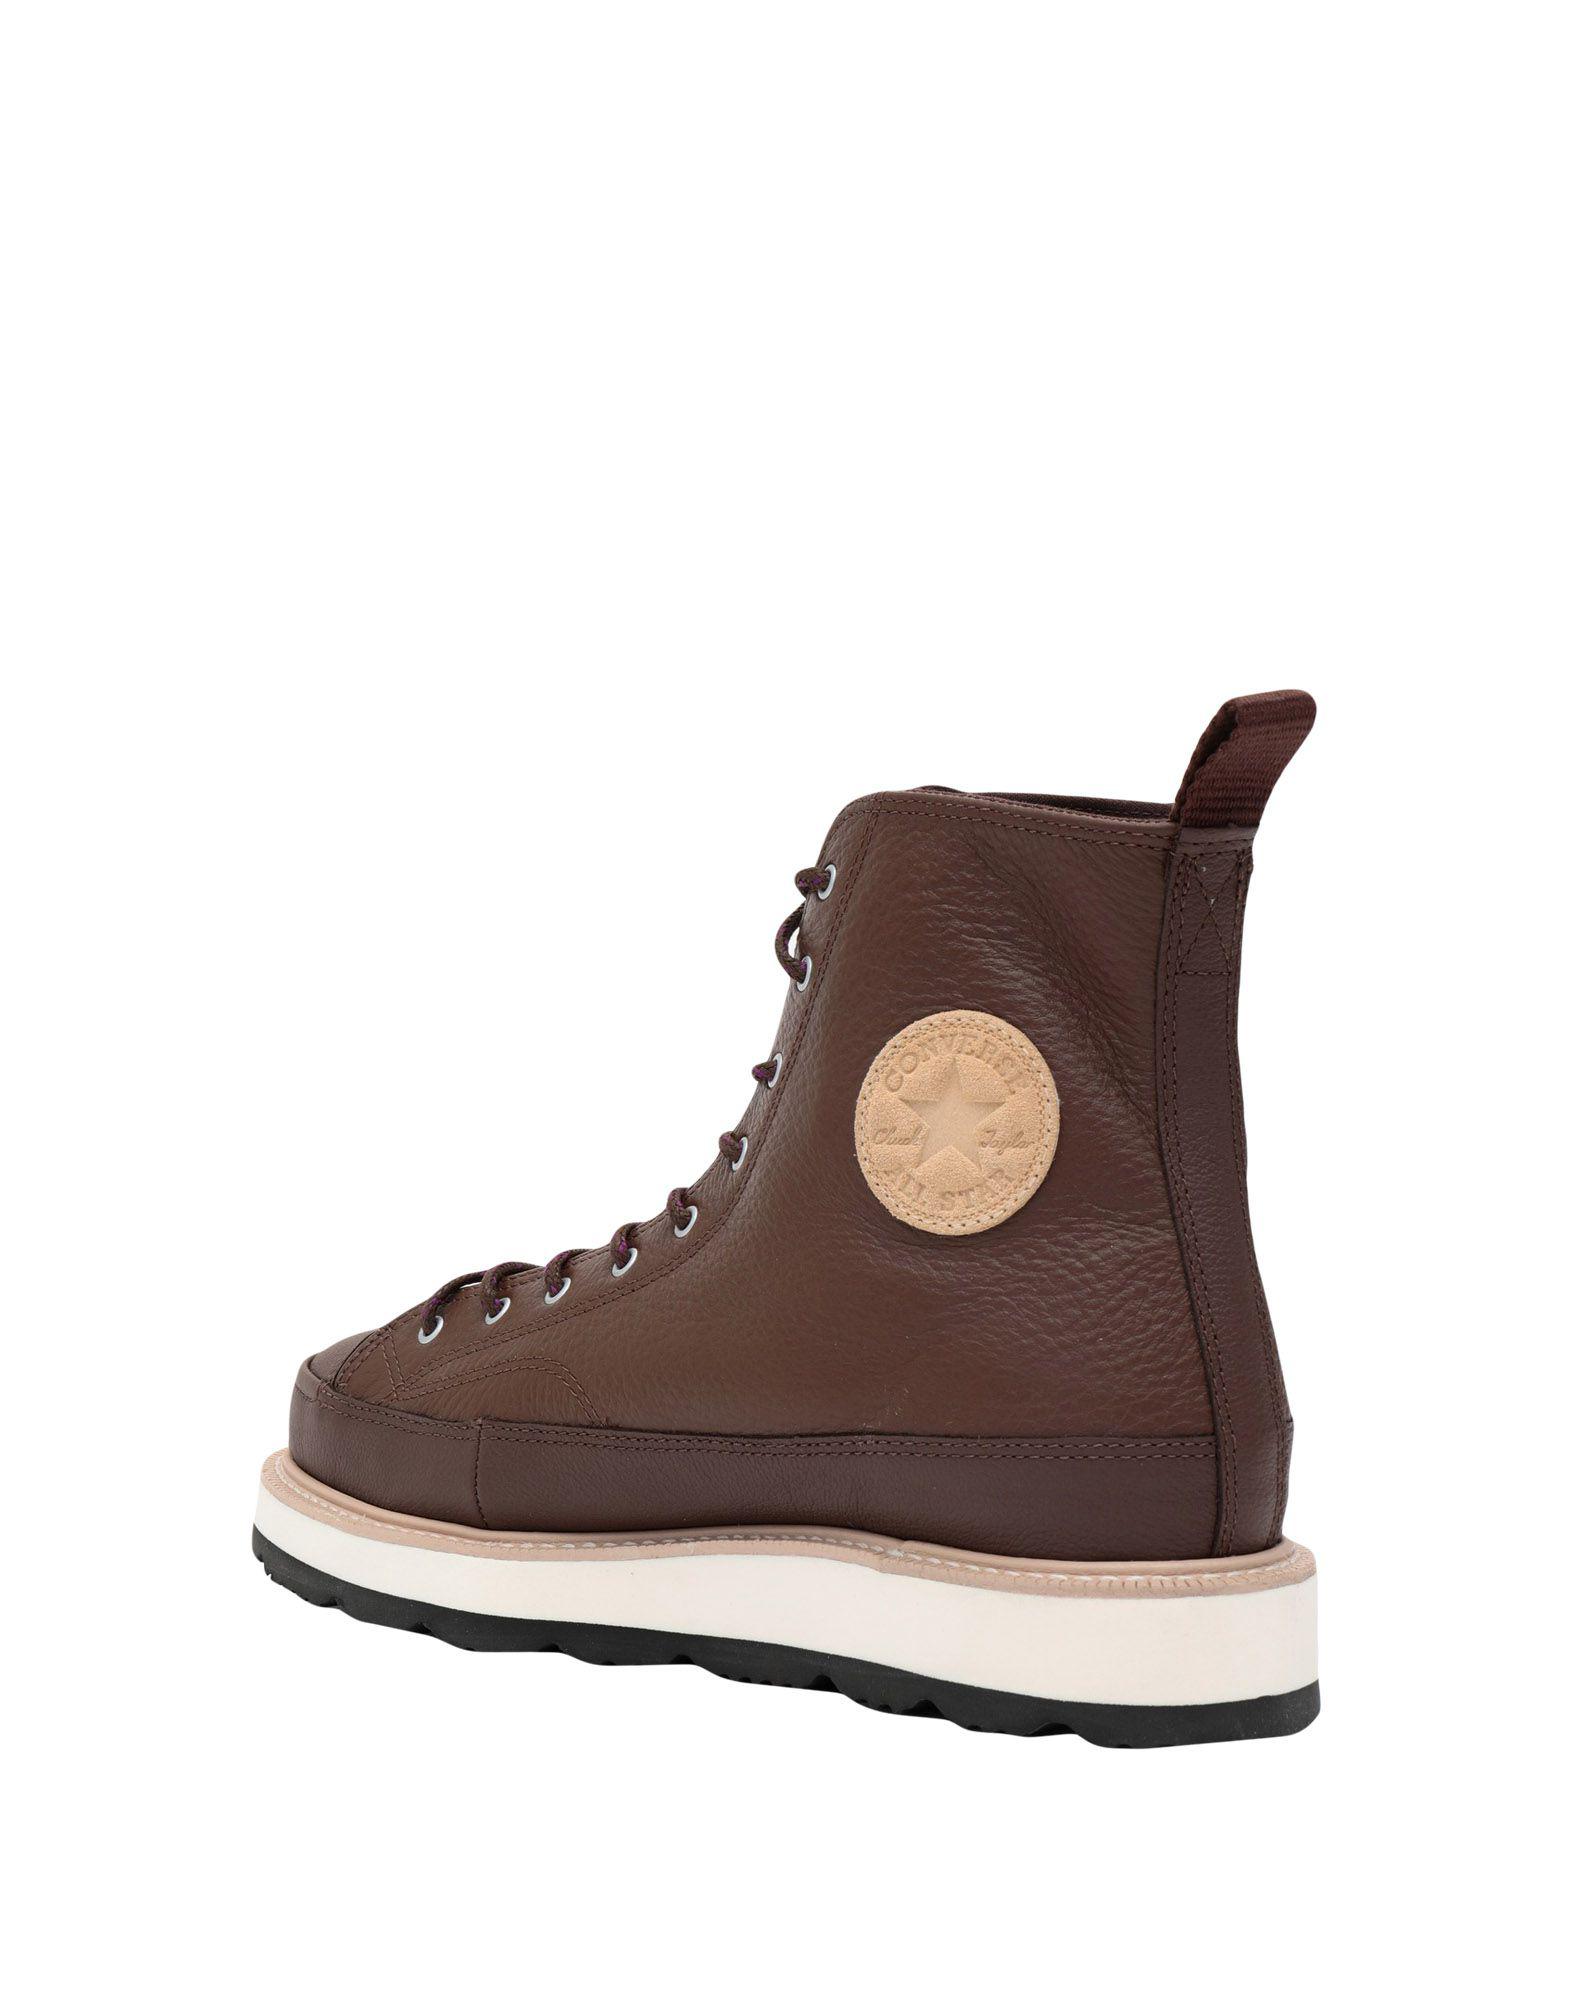 converse coyote brown boots